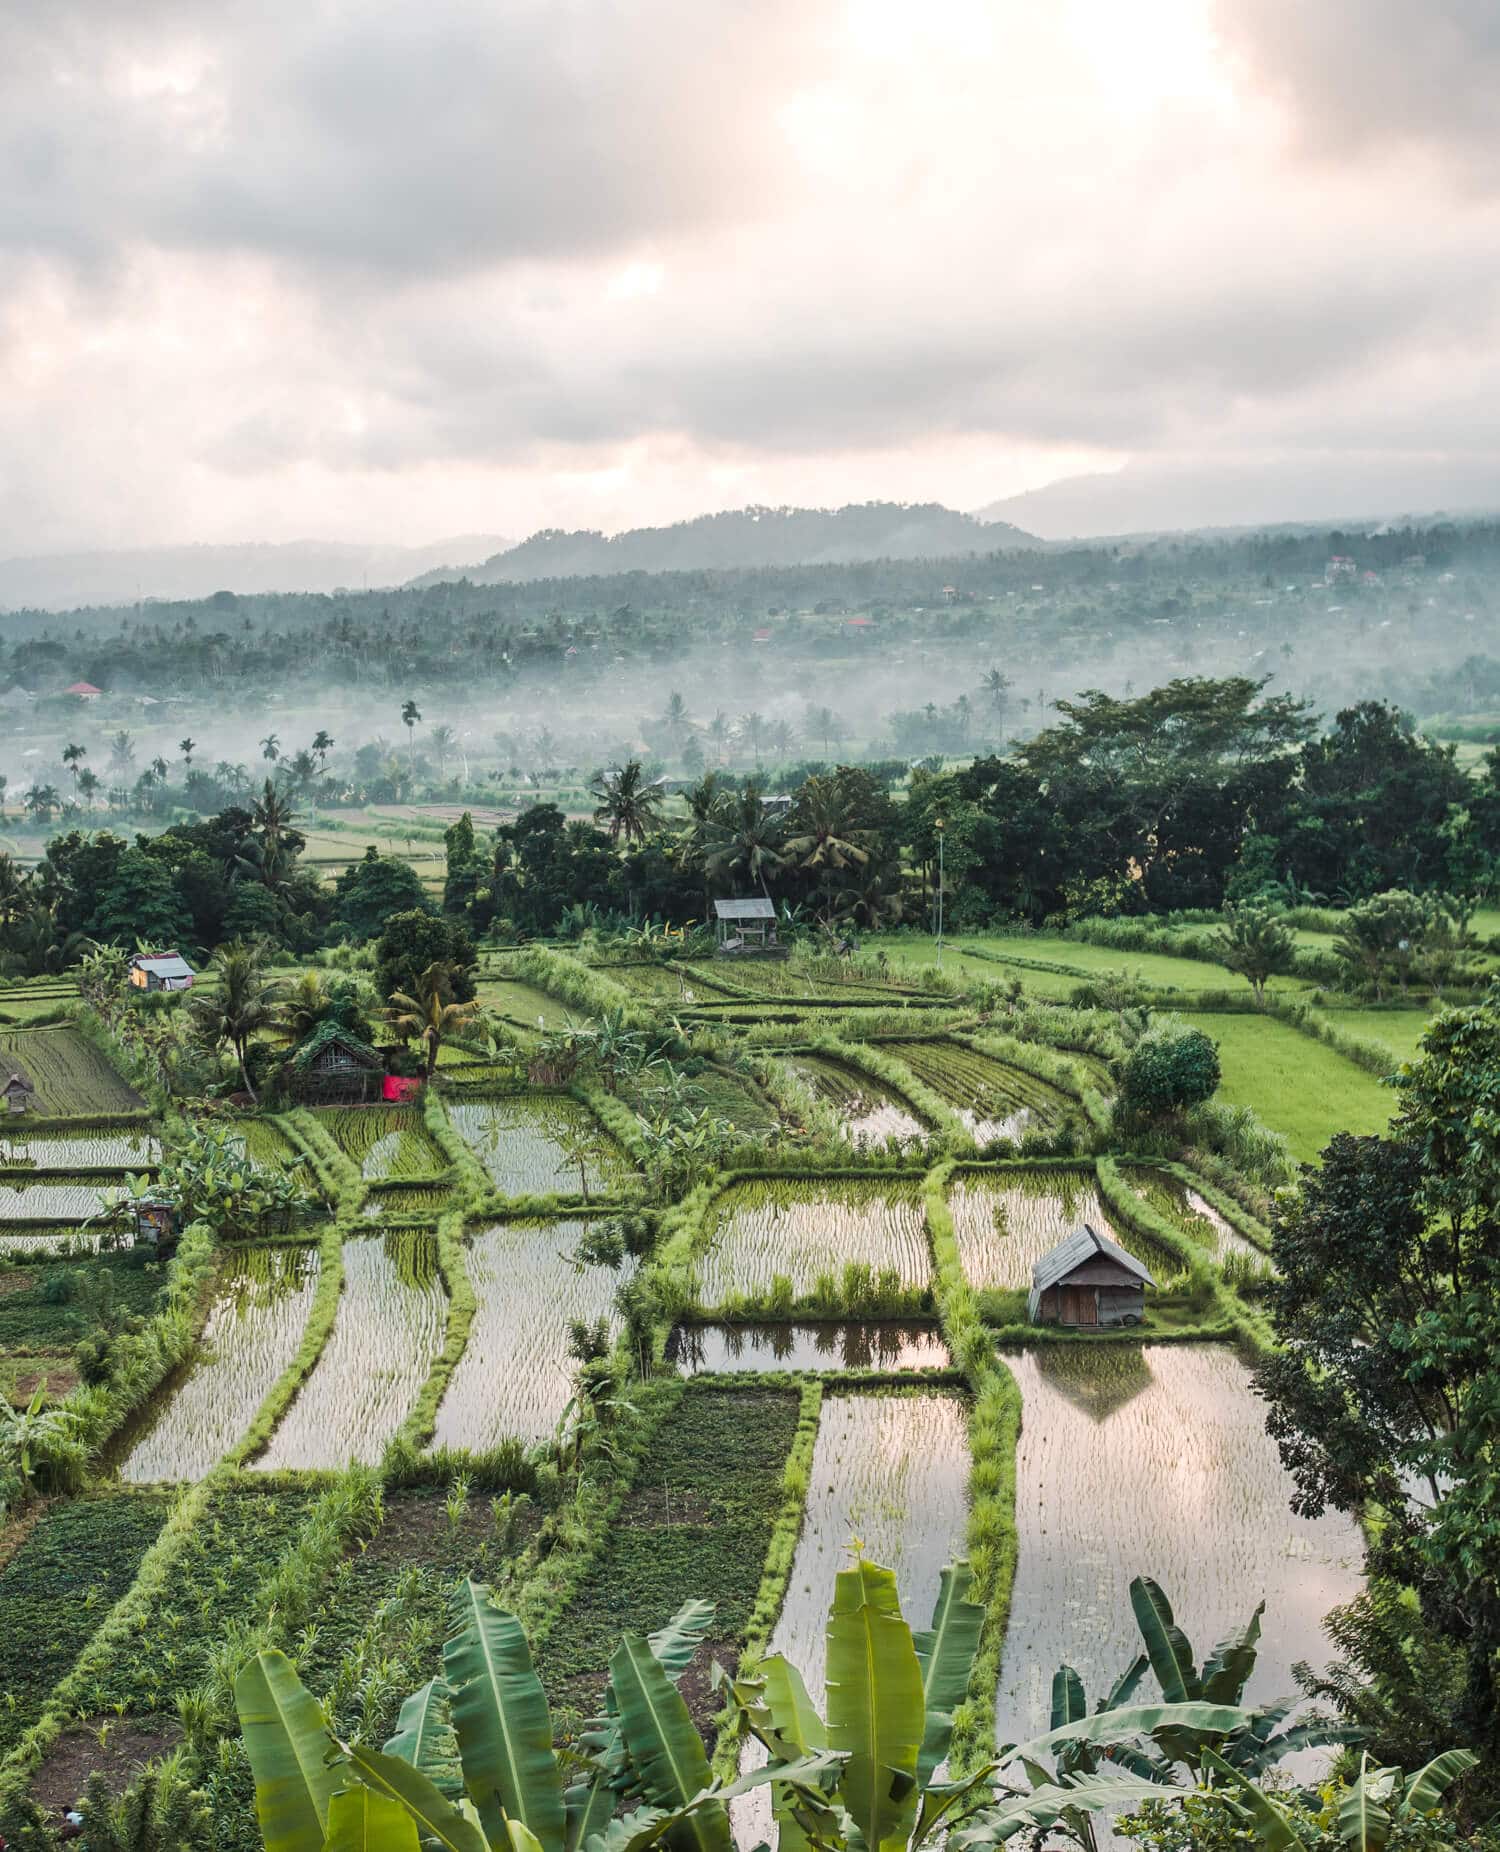 View over lush rice fields and jungle in East Bali at sunset during the rainy season.